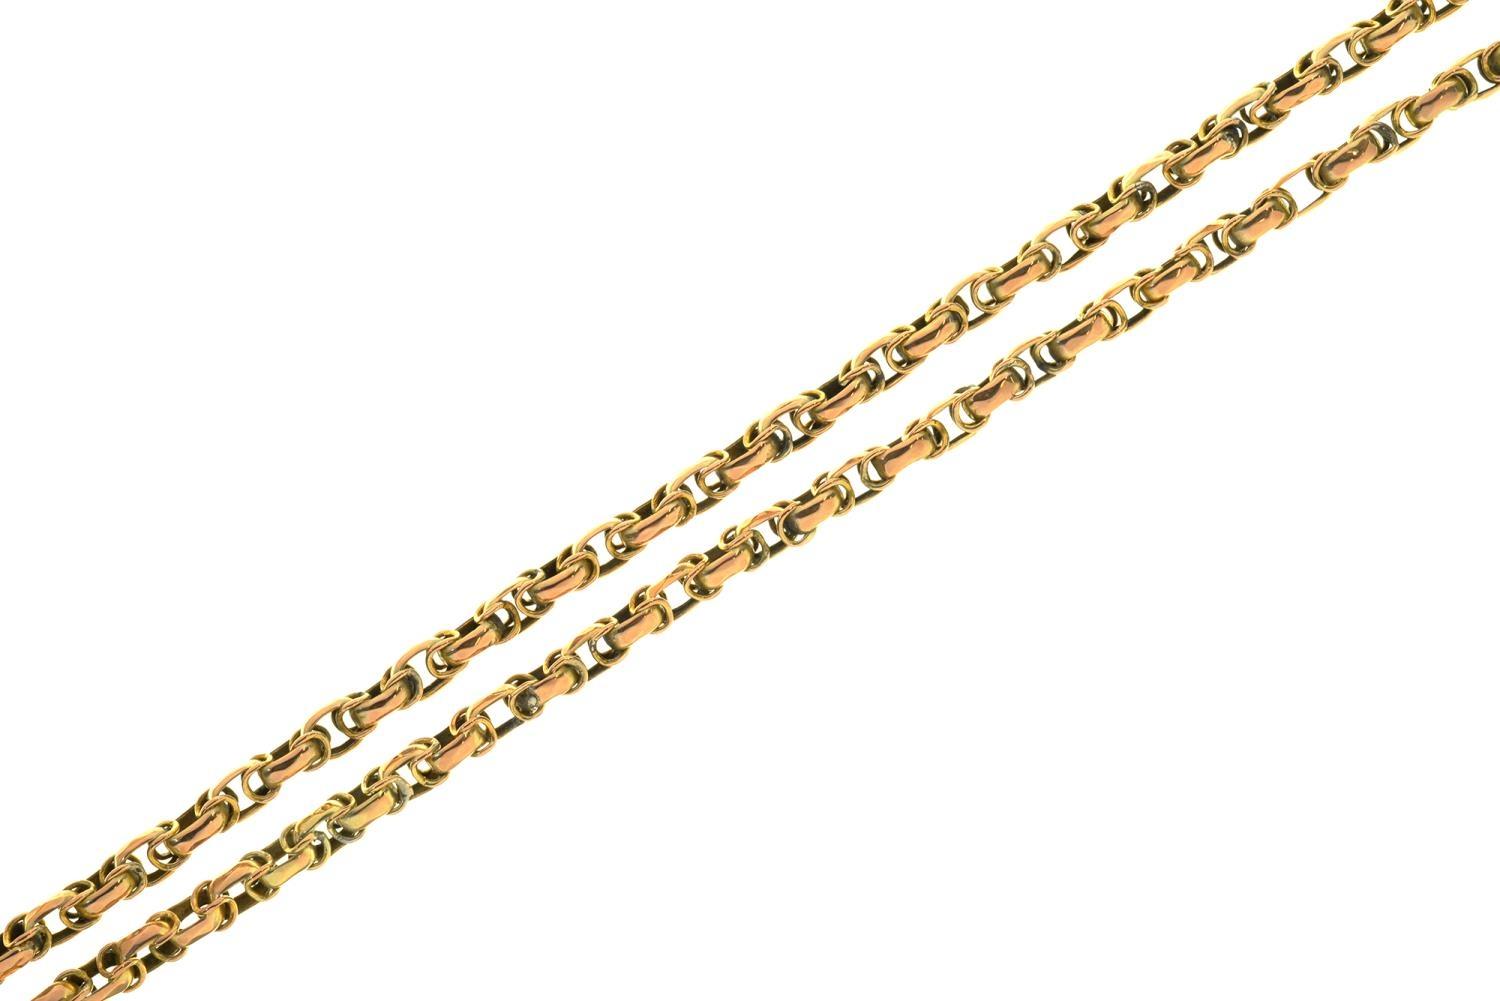 A GOLD LONG CHAIN, LATE 19TH C  approx 155cm, marked 9ct, 27.5g Light wear consistent with age, no